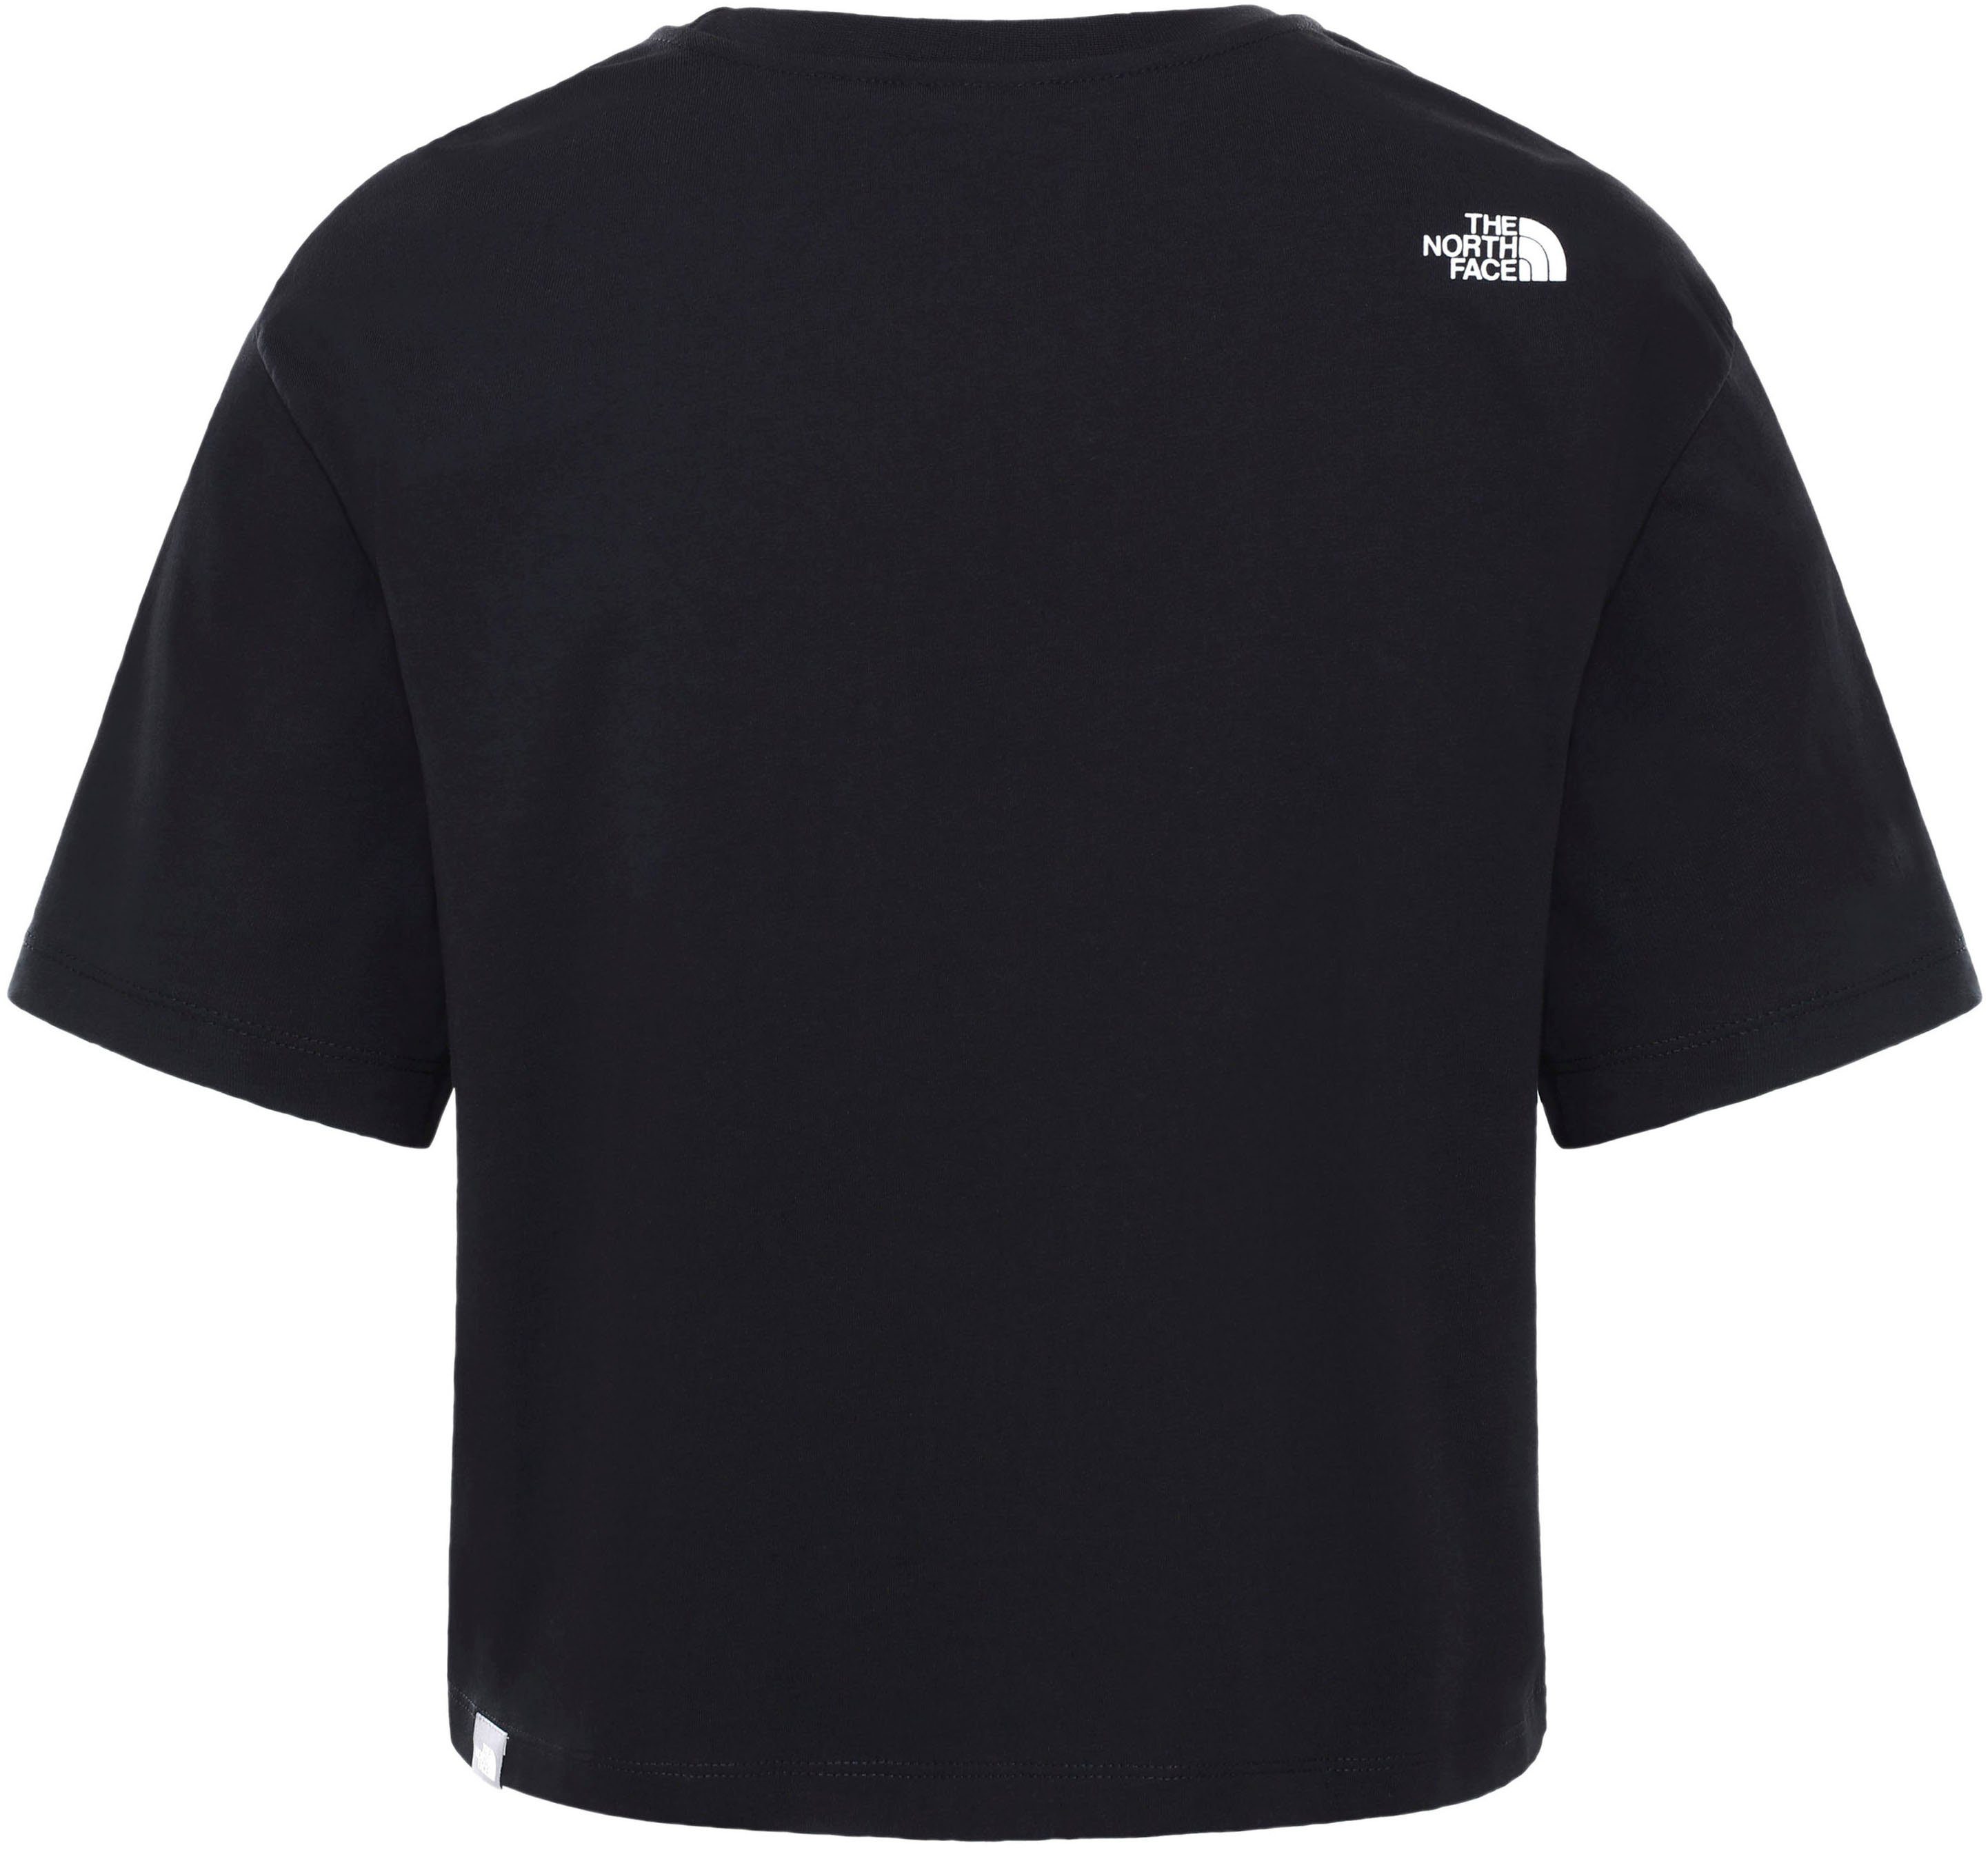 DOME North Face T-Shirt SIMPLE The